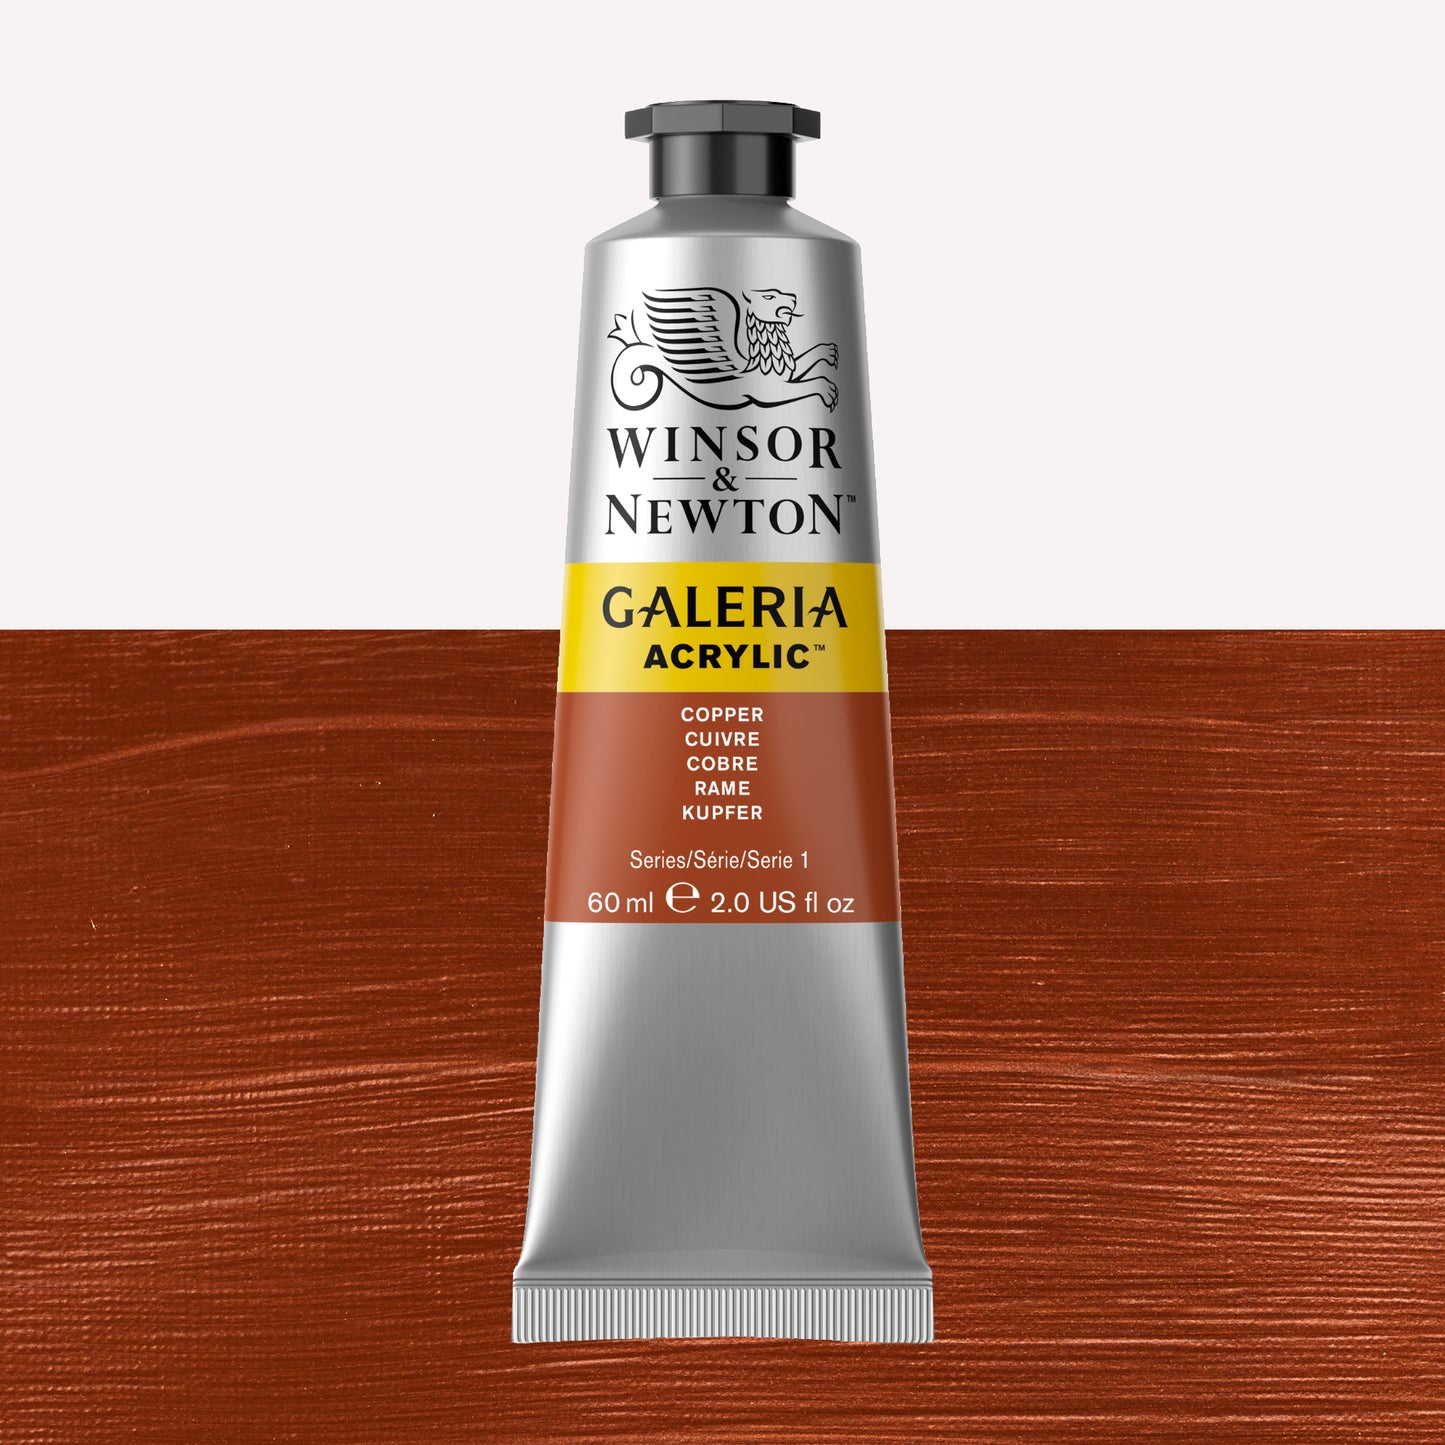 A 60ml tube of vibrant Galeria Acrylic paint in the shade Copper. This professional-quality paint is packaged in a silver tube with a black lid. Made by Winsor and Newton.